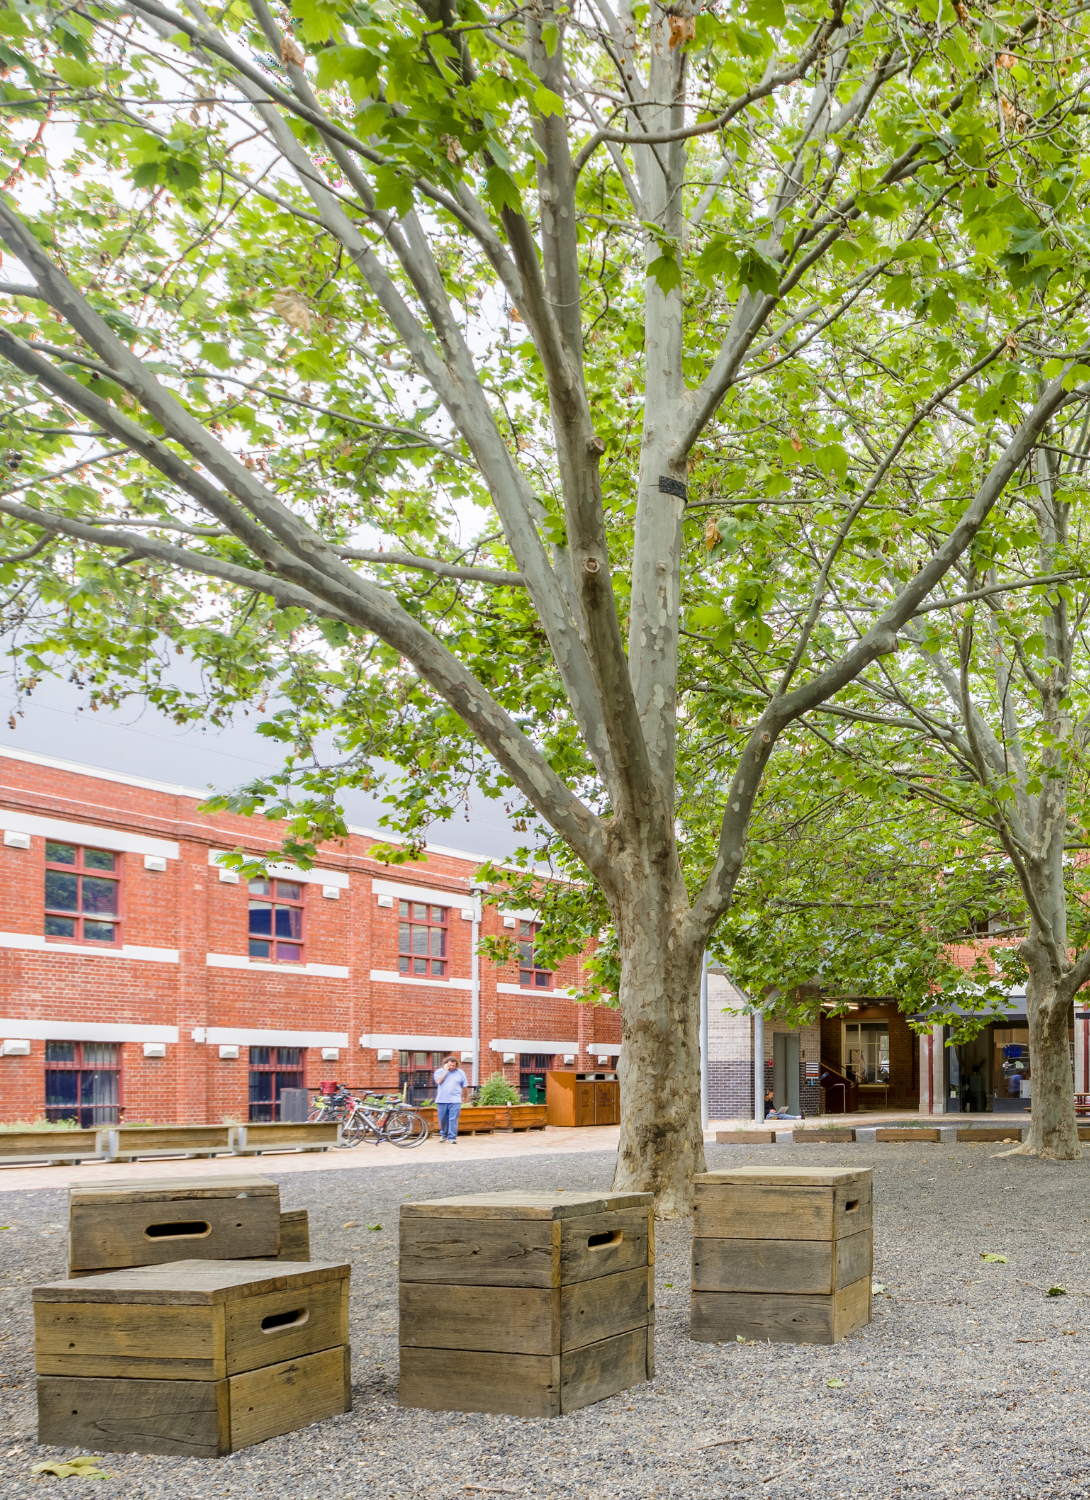 Photo of four wooden crate seats are scattered in the bottom left on grey gravel flooring. To the right is a large tree with green foliage, and in the background is a red brick building.